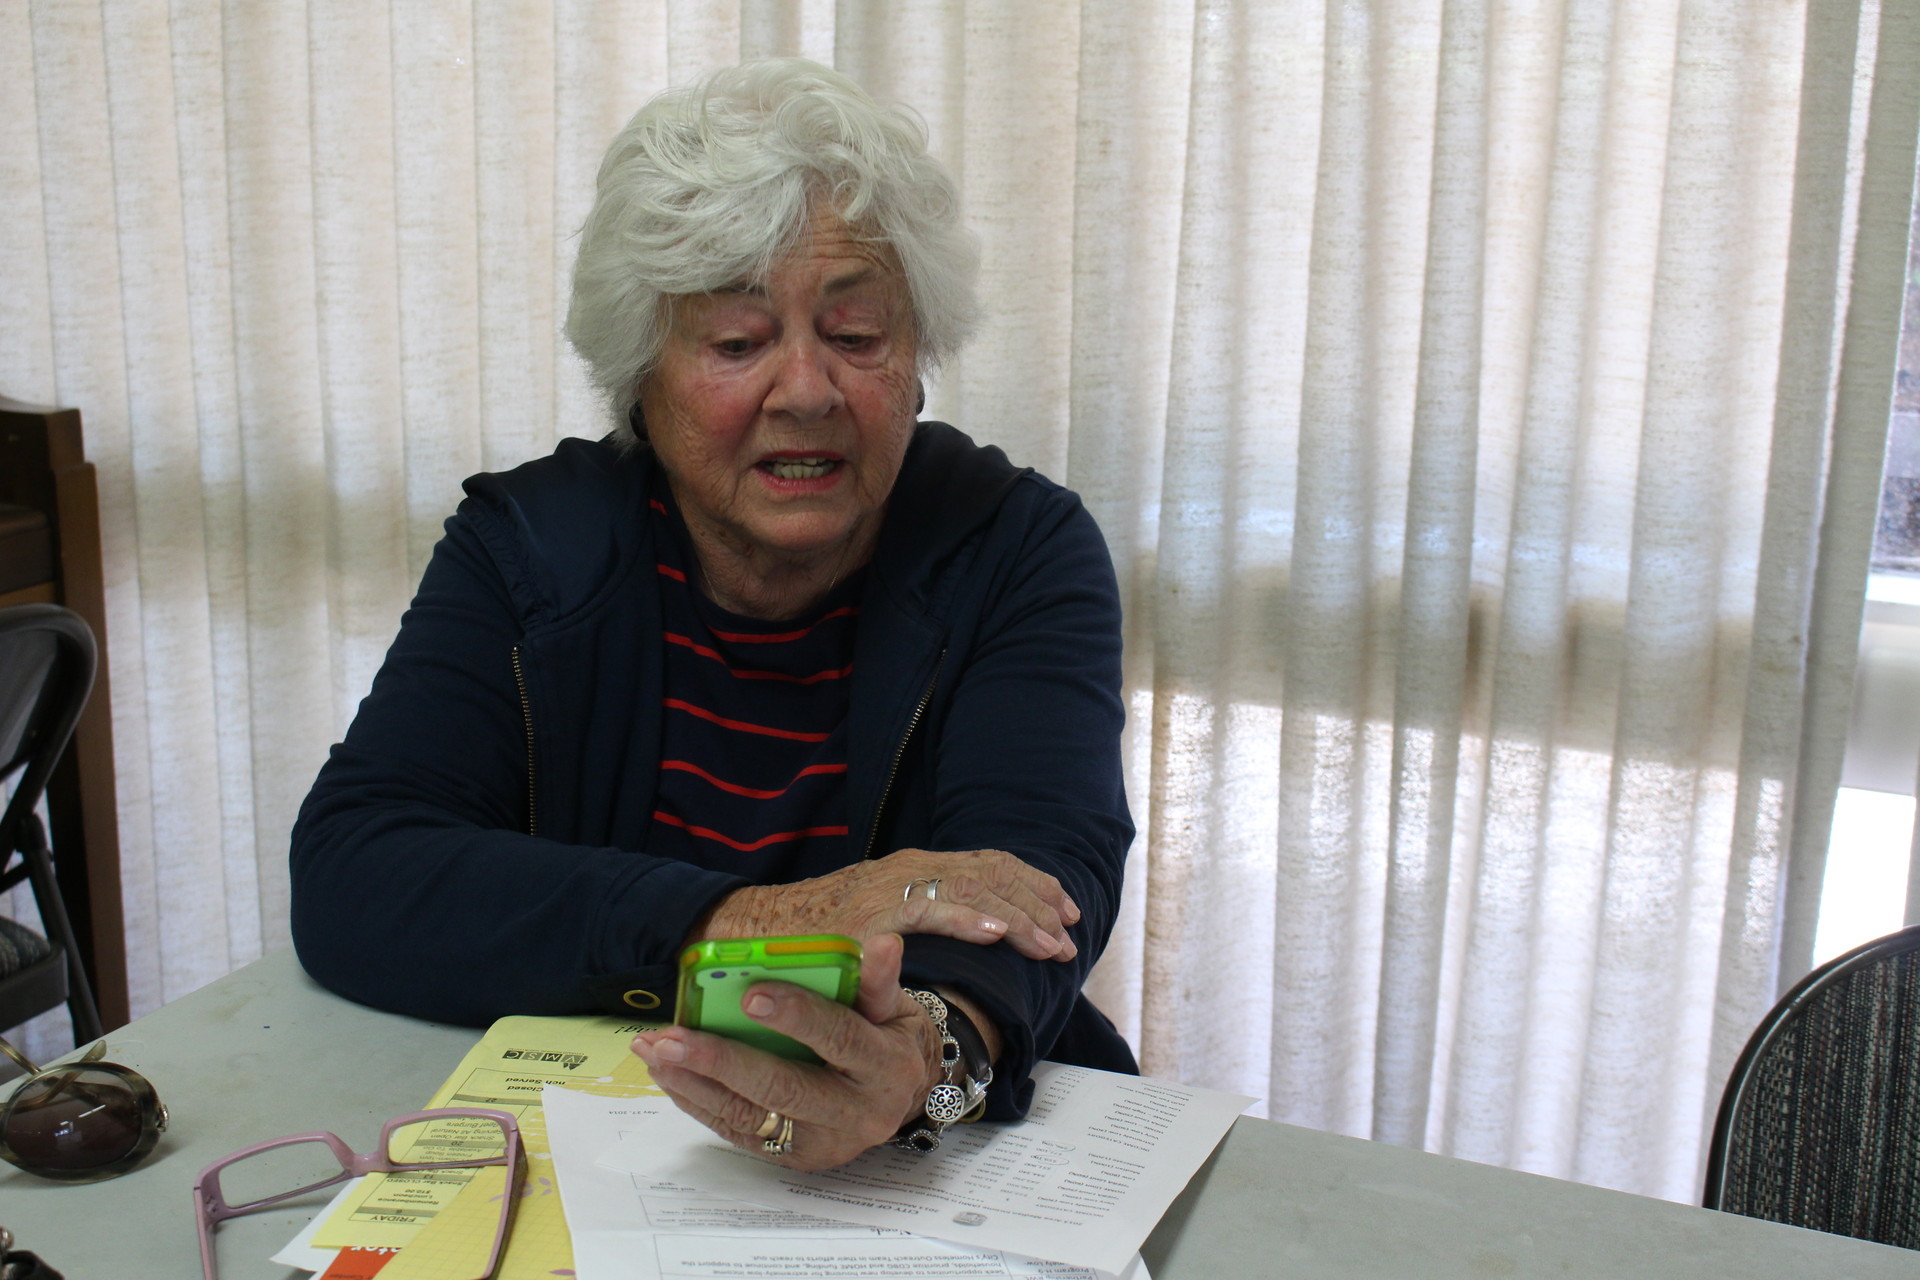 Barbara Britschgi, 80, prepares for a senior affairs commission meeting in Redwood City, her lifelong hometown. She says skyrocketing rents and housing prices are diminishing Redwood City's diversity, as well as resident's quality of life.